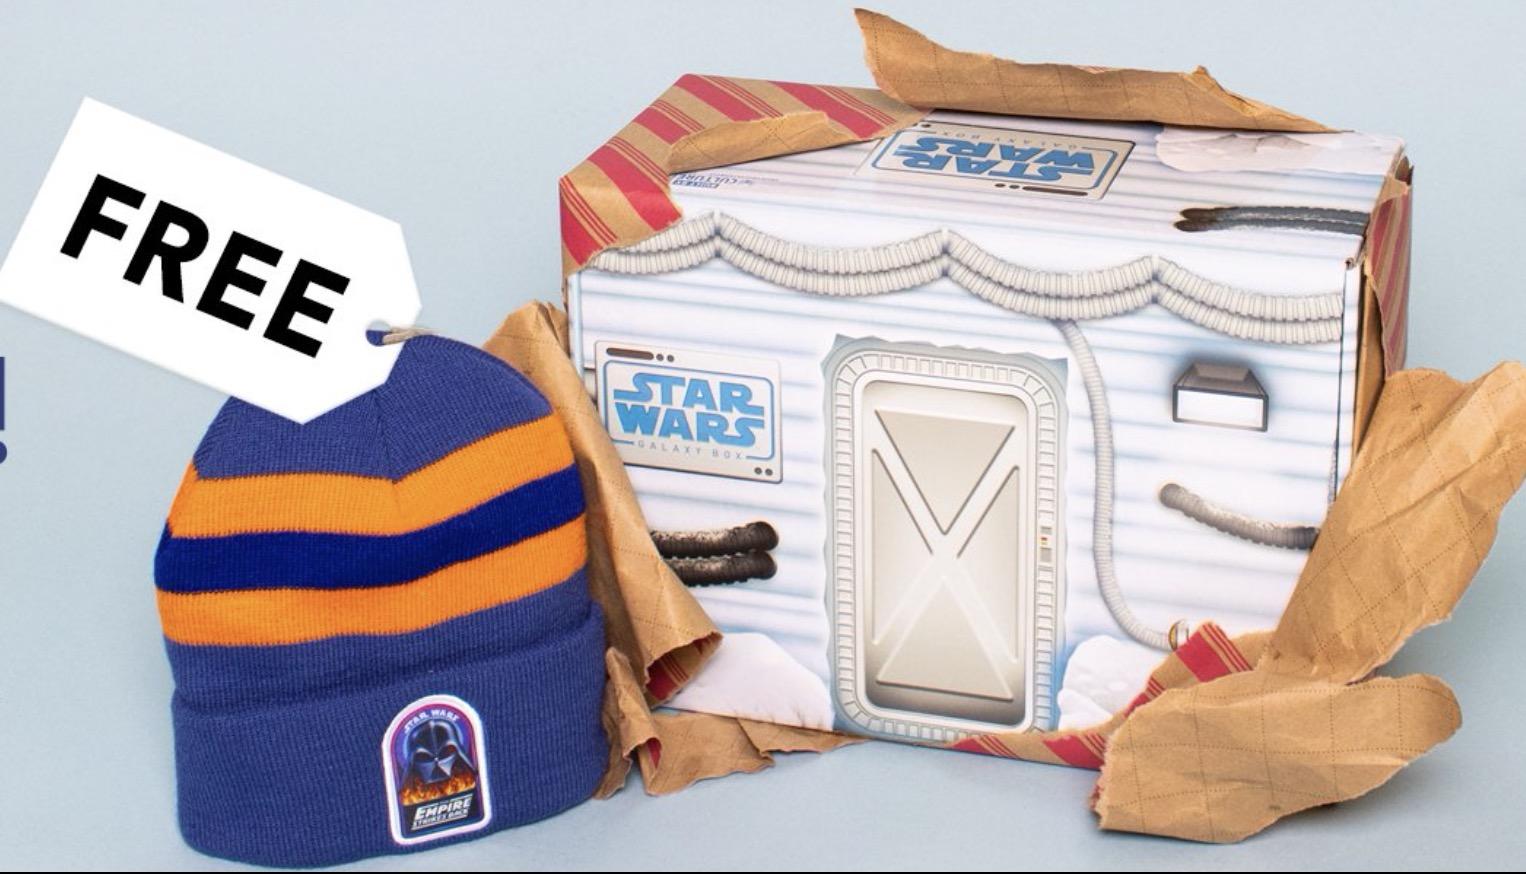 Star Wars Galaxy Box Black Friday Sale – Free Gift with Purchase